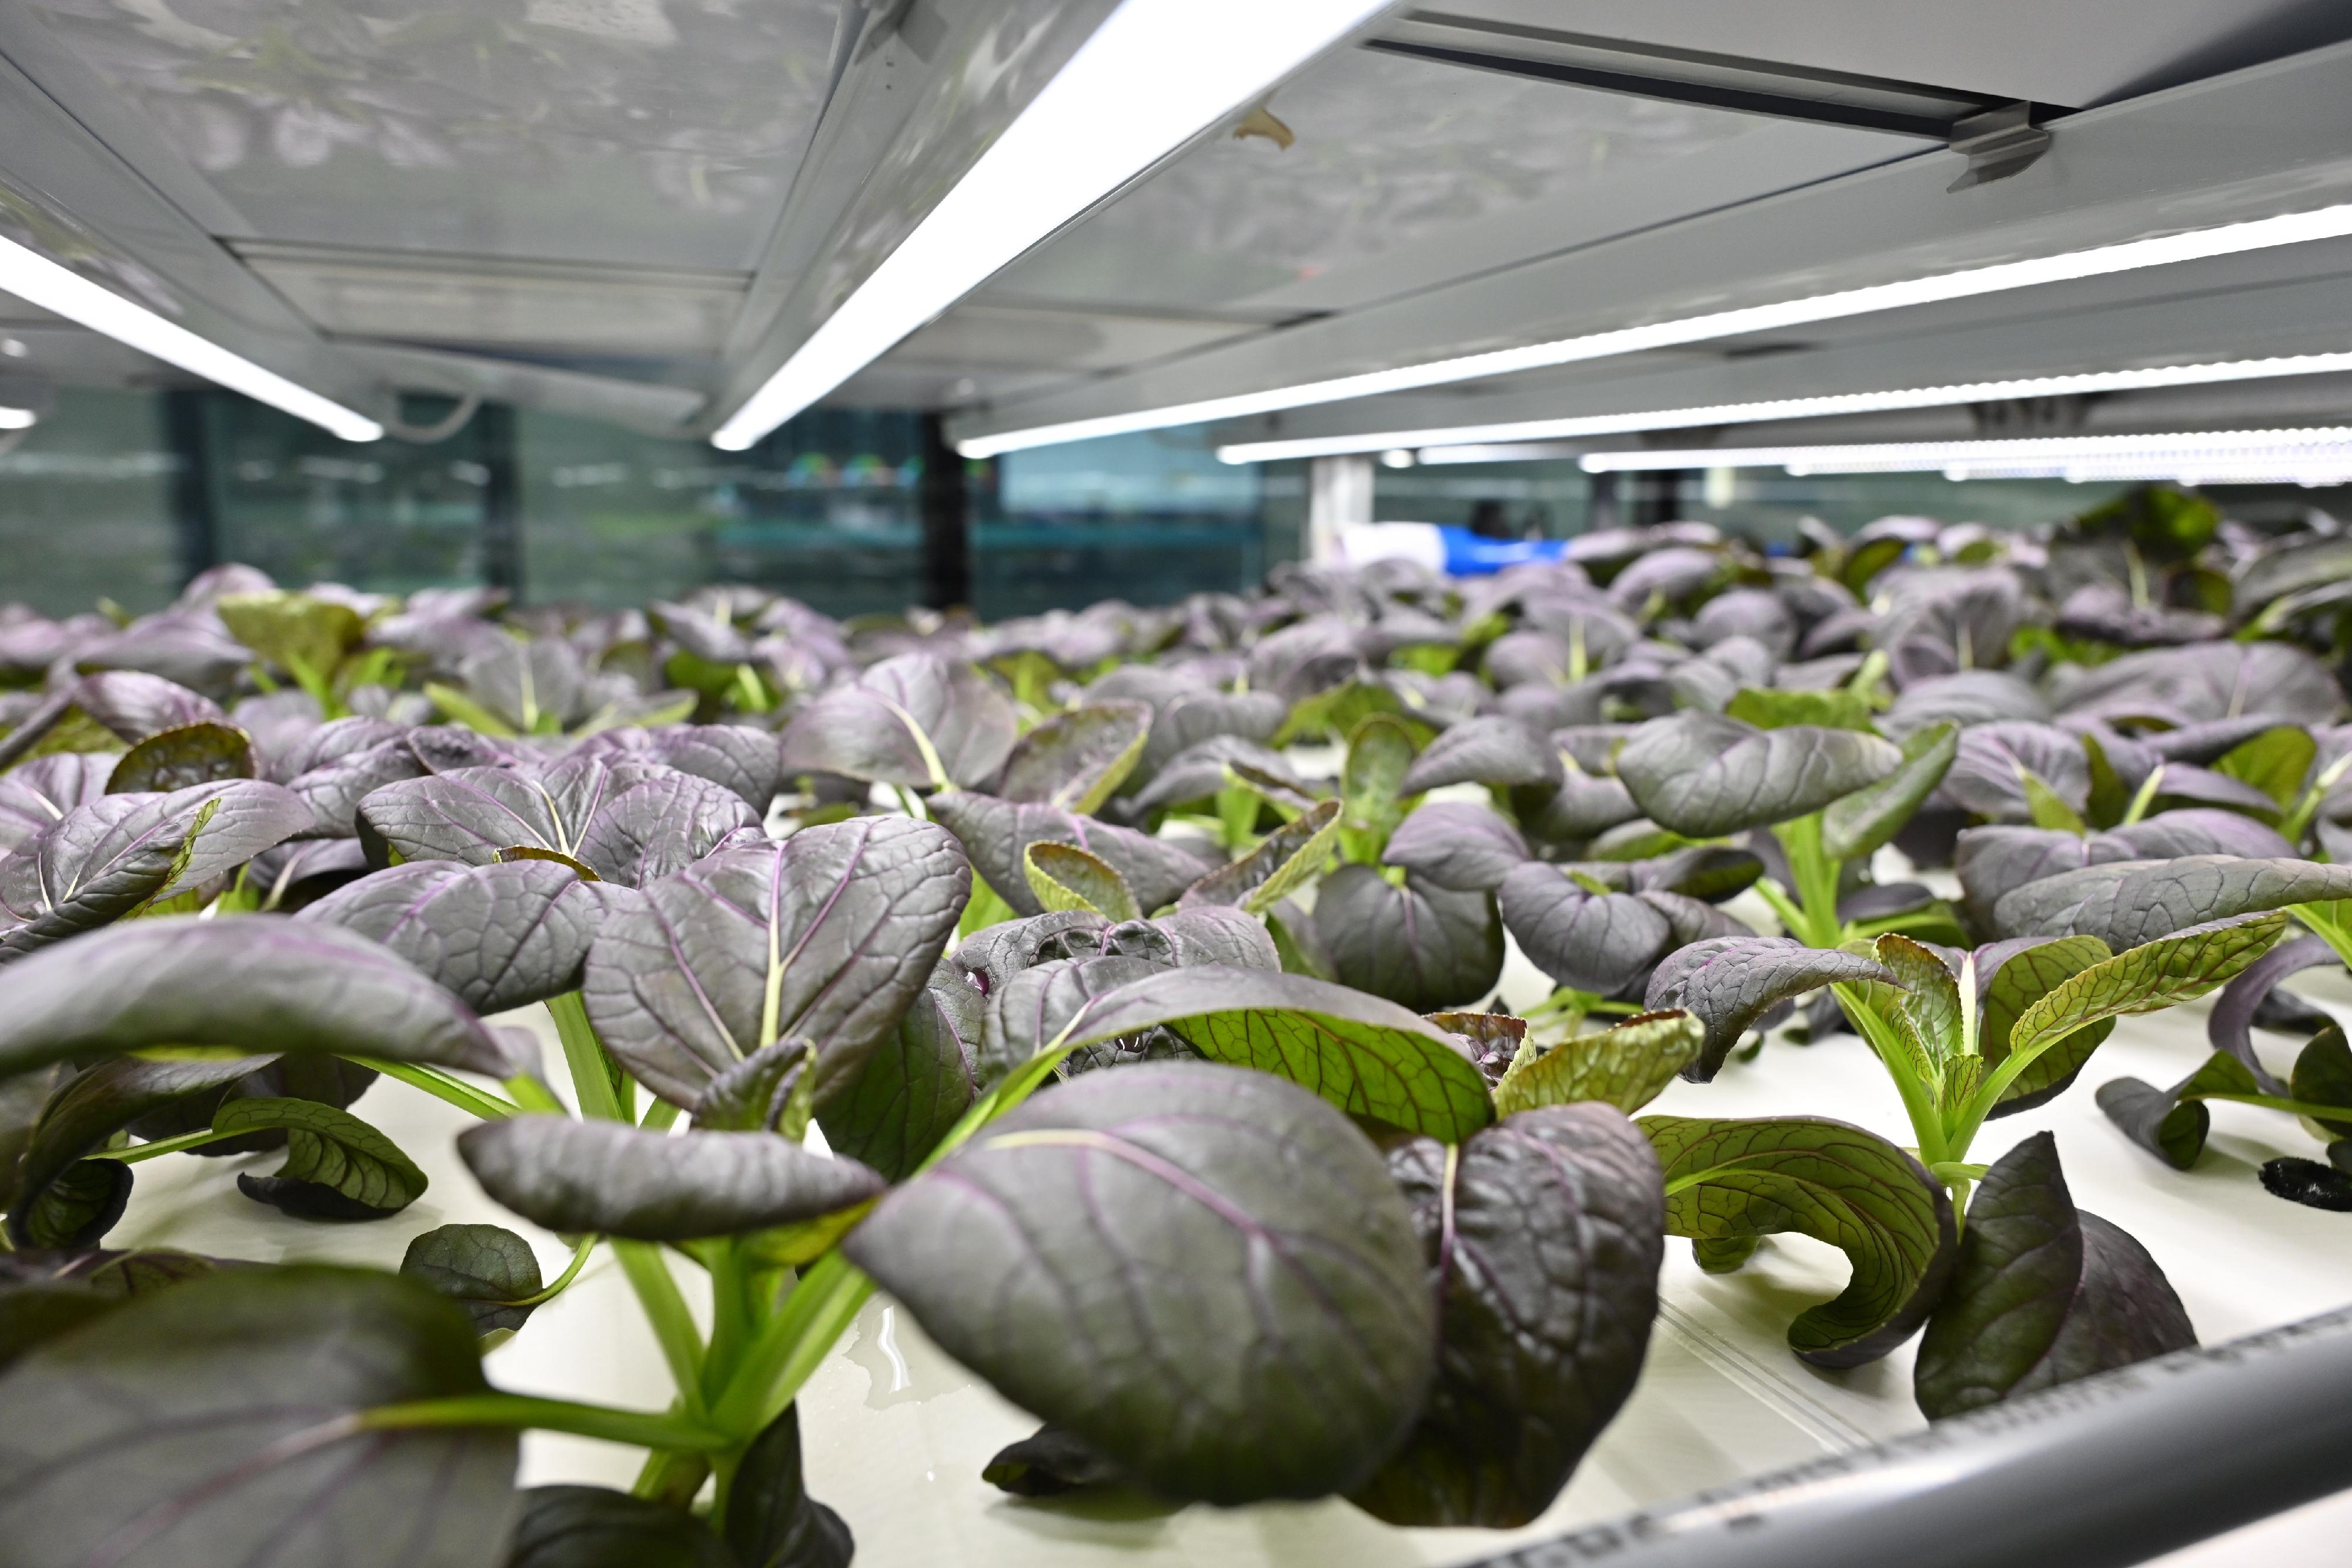 The Agriculture, Fisheries and Conservation Department and Phase 2 of the Controlled Environment Hydroponic Research and Development Centre today (July 26) showcased newly introduced hydroponic cultivation technologies as well as crops that were successfully cultivated with controlled environment hydroponic technology. Photo shows purple pak choi seedling successfully cultivated with controlled environment hydroponic technology.